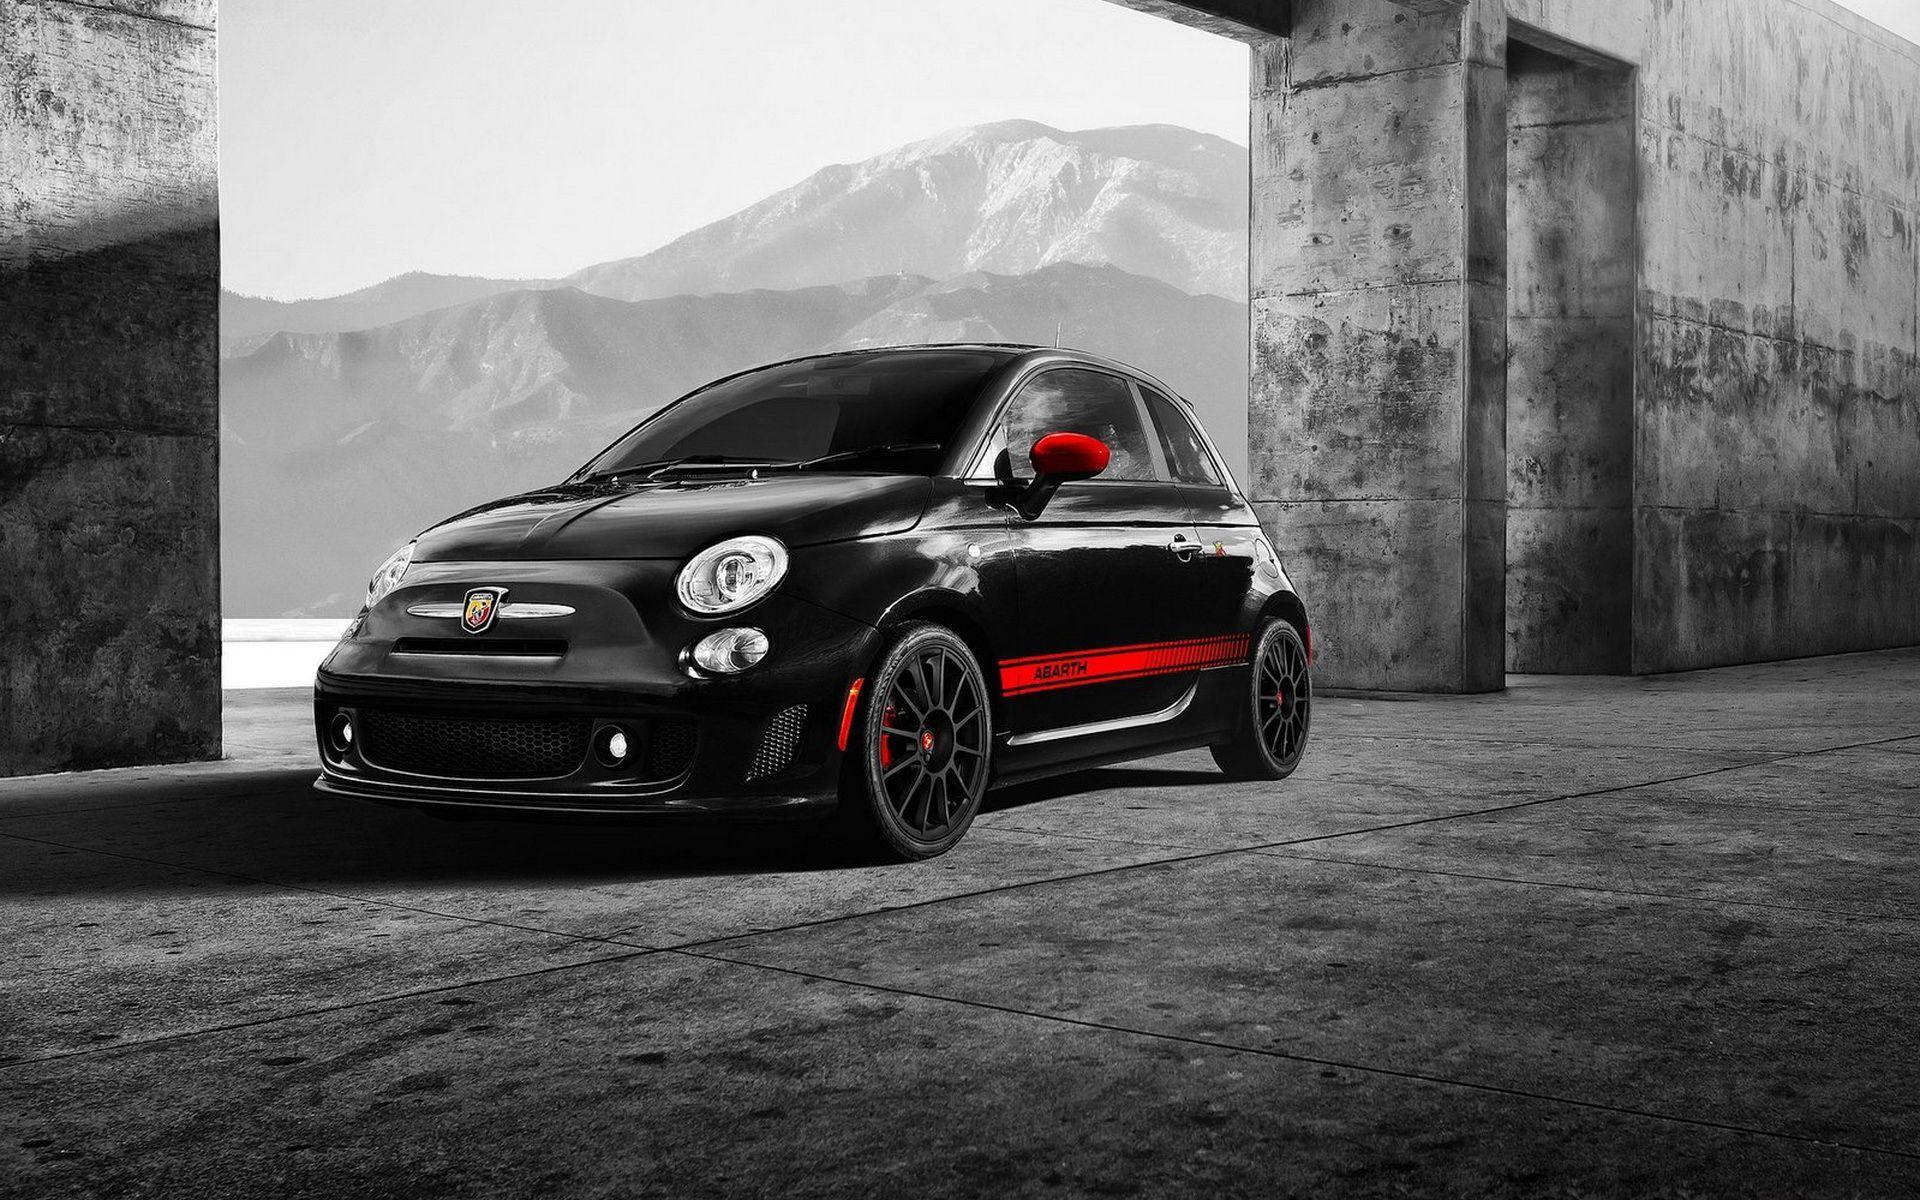 Abarth Wallpapers Wallpaper Cave